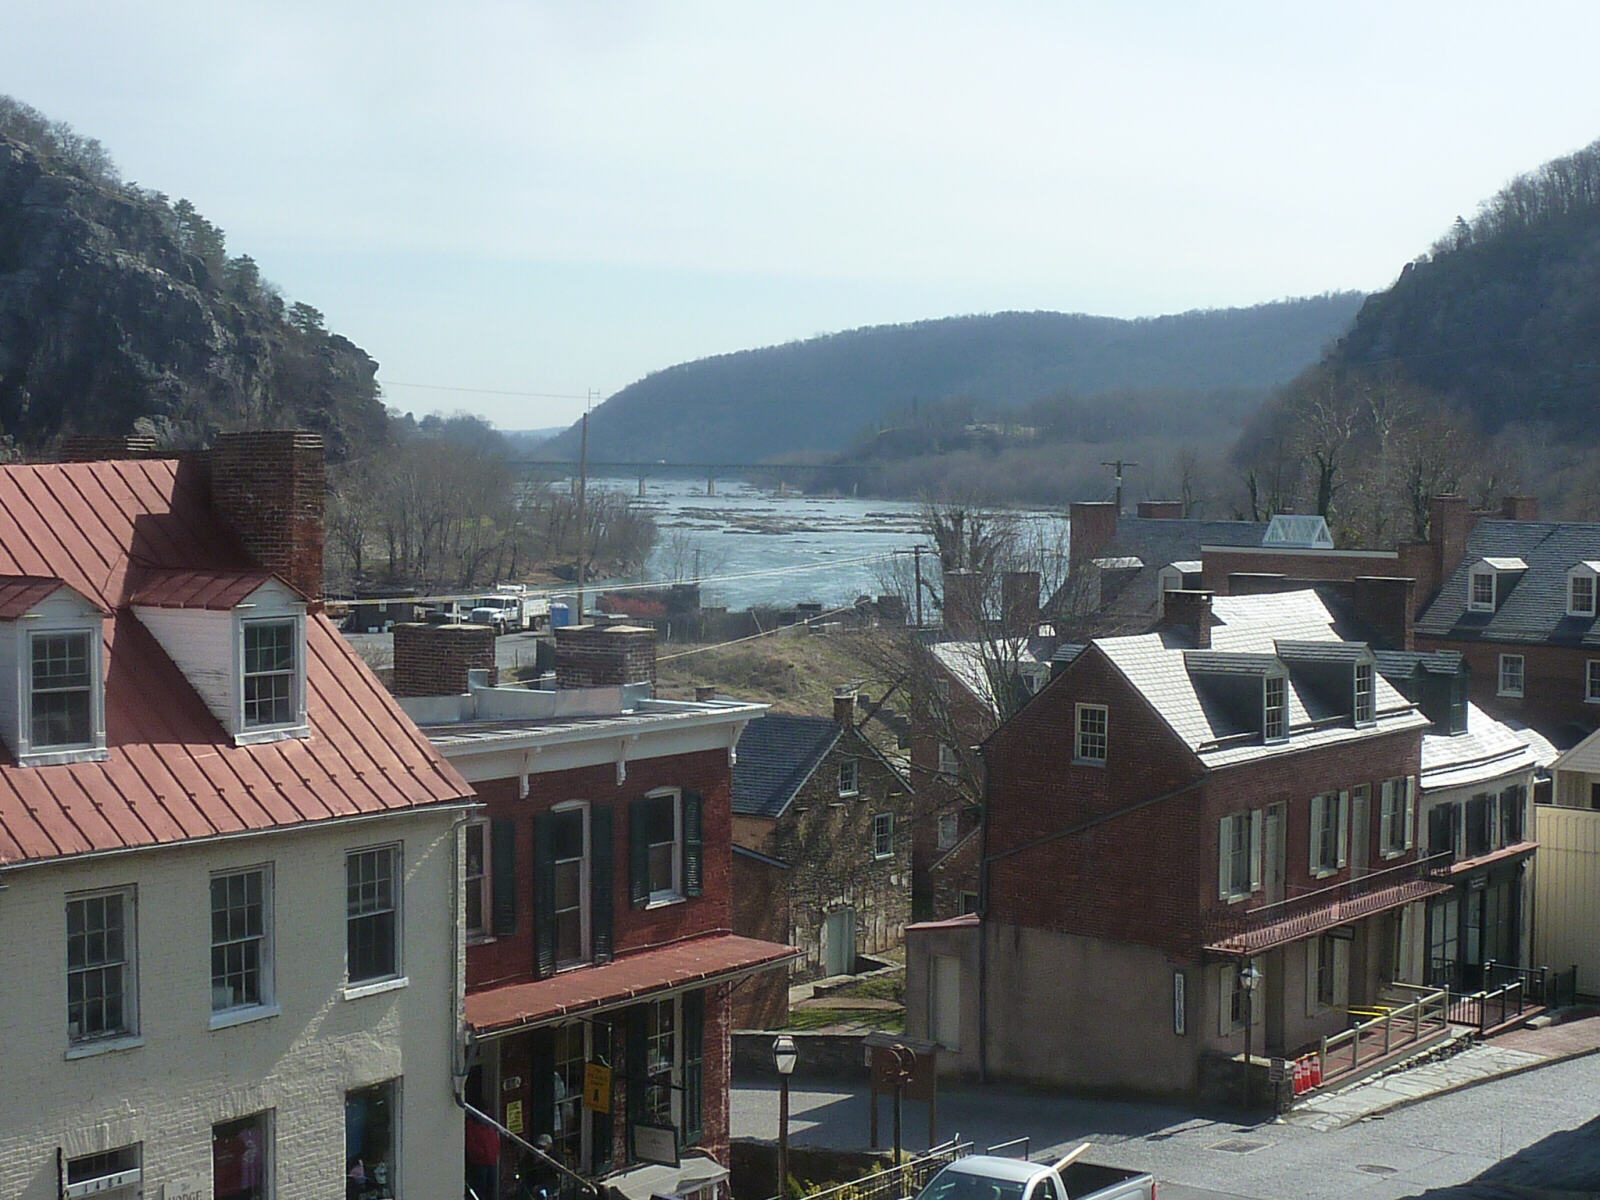 Harpers Ferry and the river from Church Street